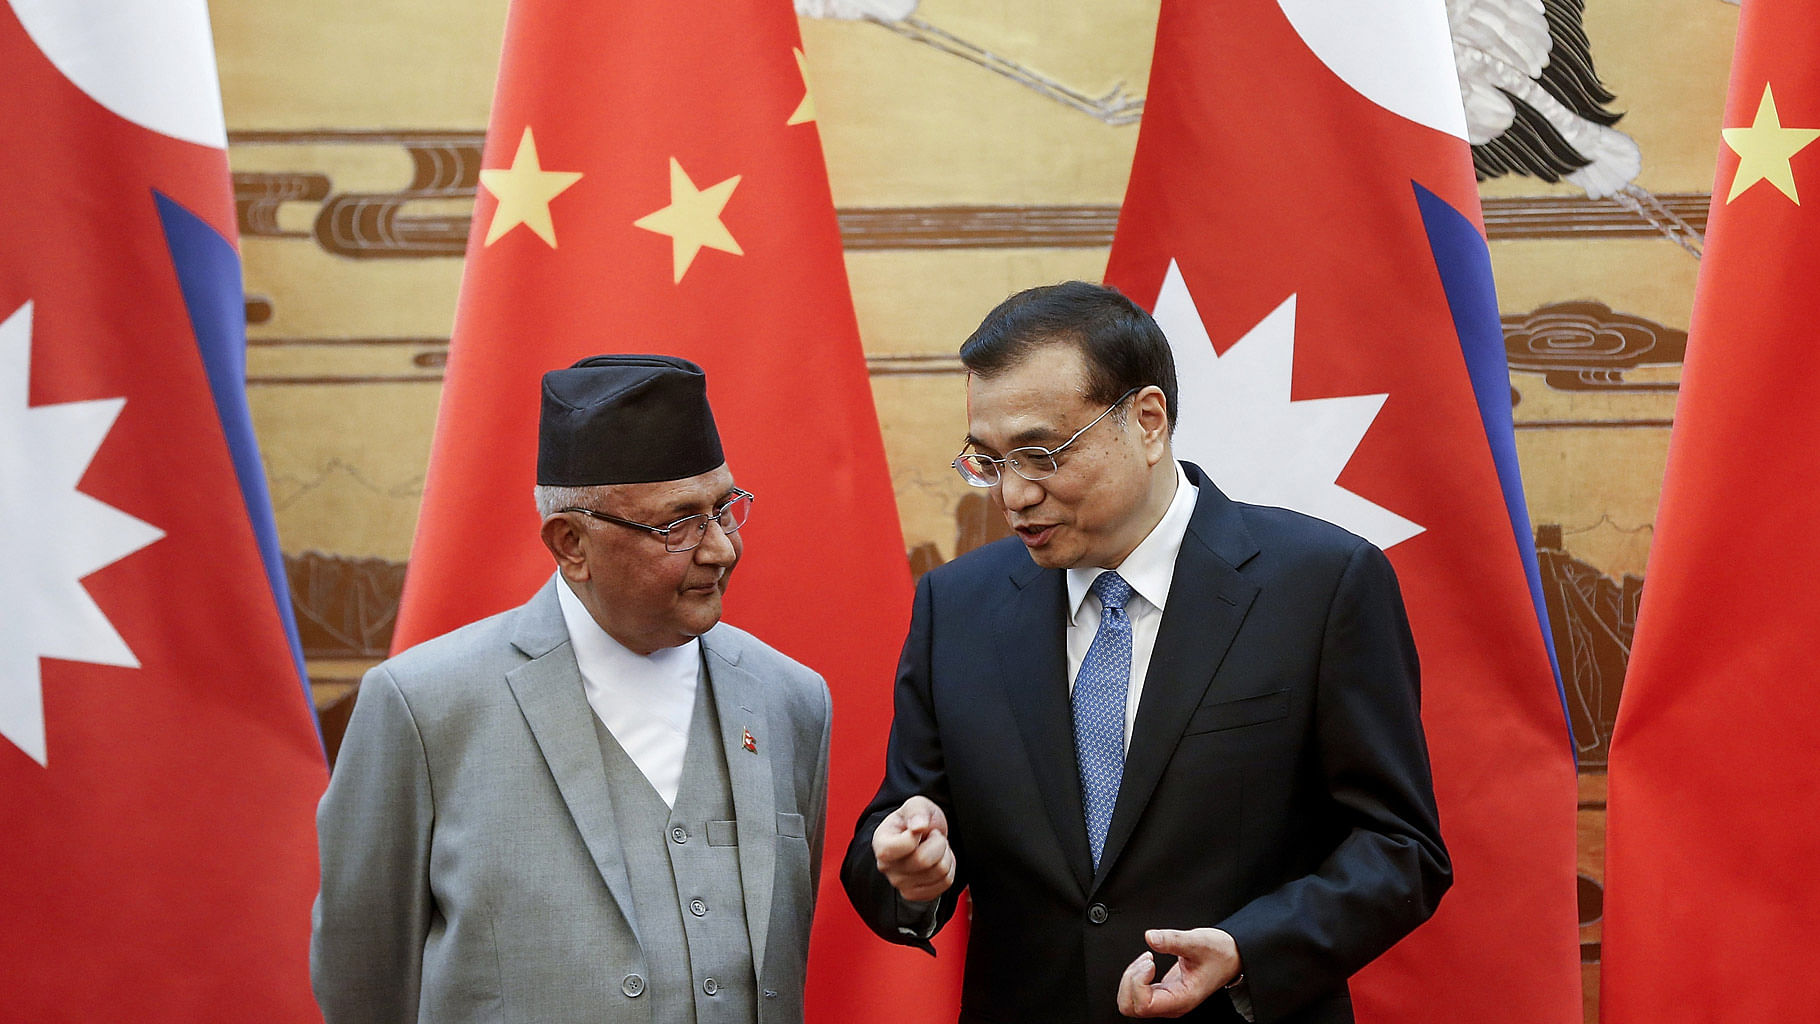 

Chinese Premier Li Keqiang  with Nepal’s Prime Minister Khadga Prasad Oli during a signing ceremony at the Great Hall of the People, March 21, 2016 in Beijing, China. (Photo: AP)